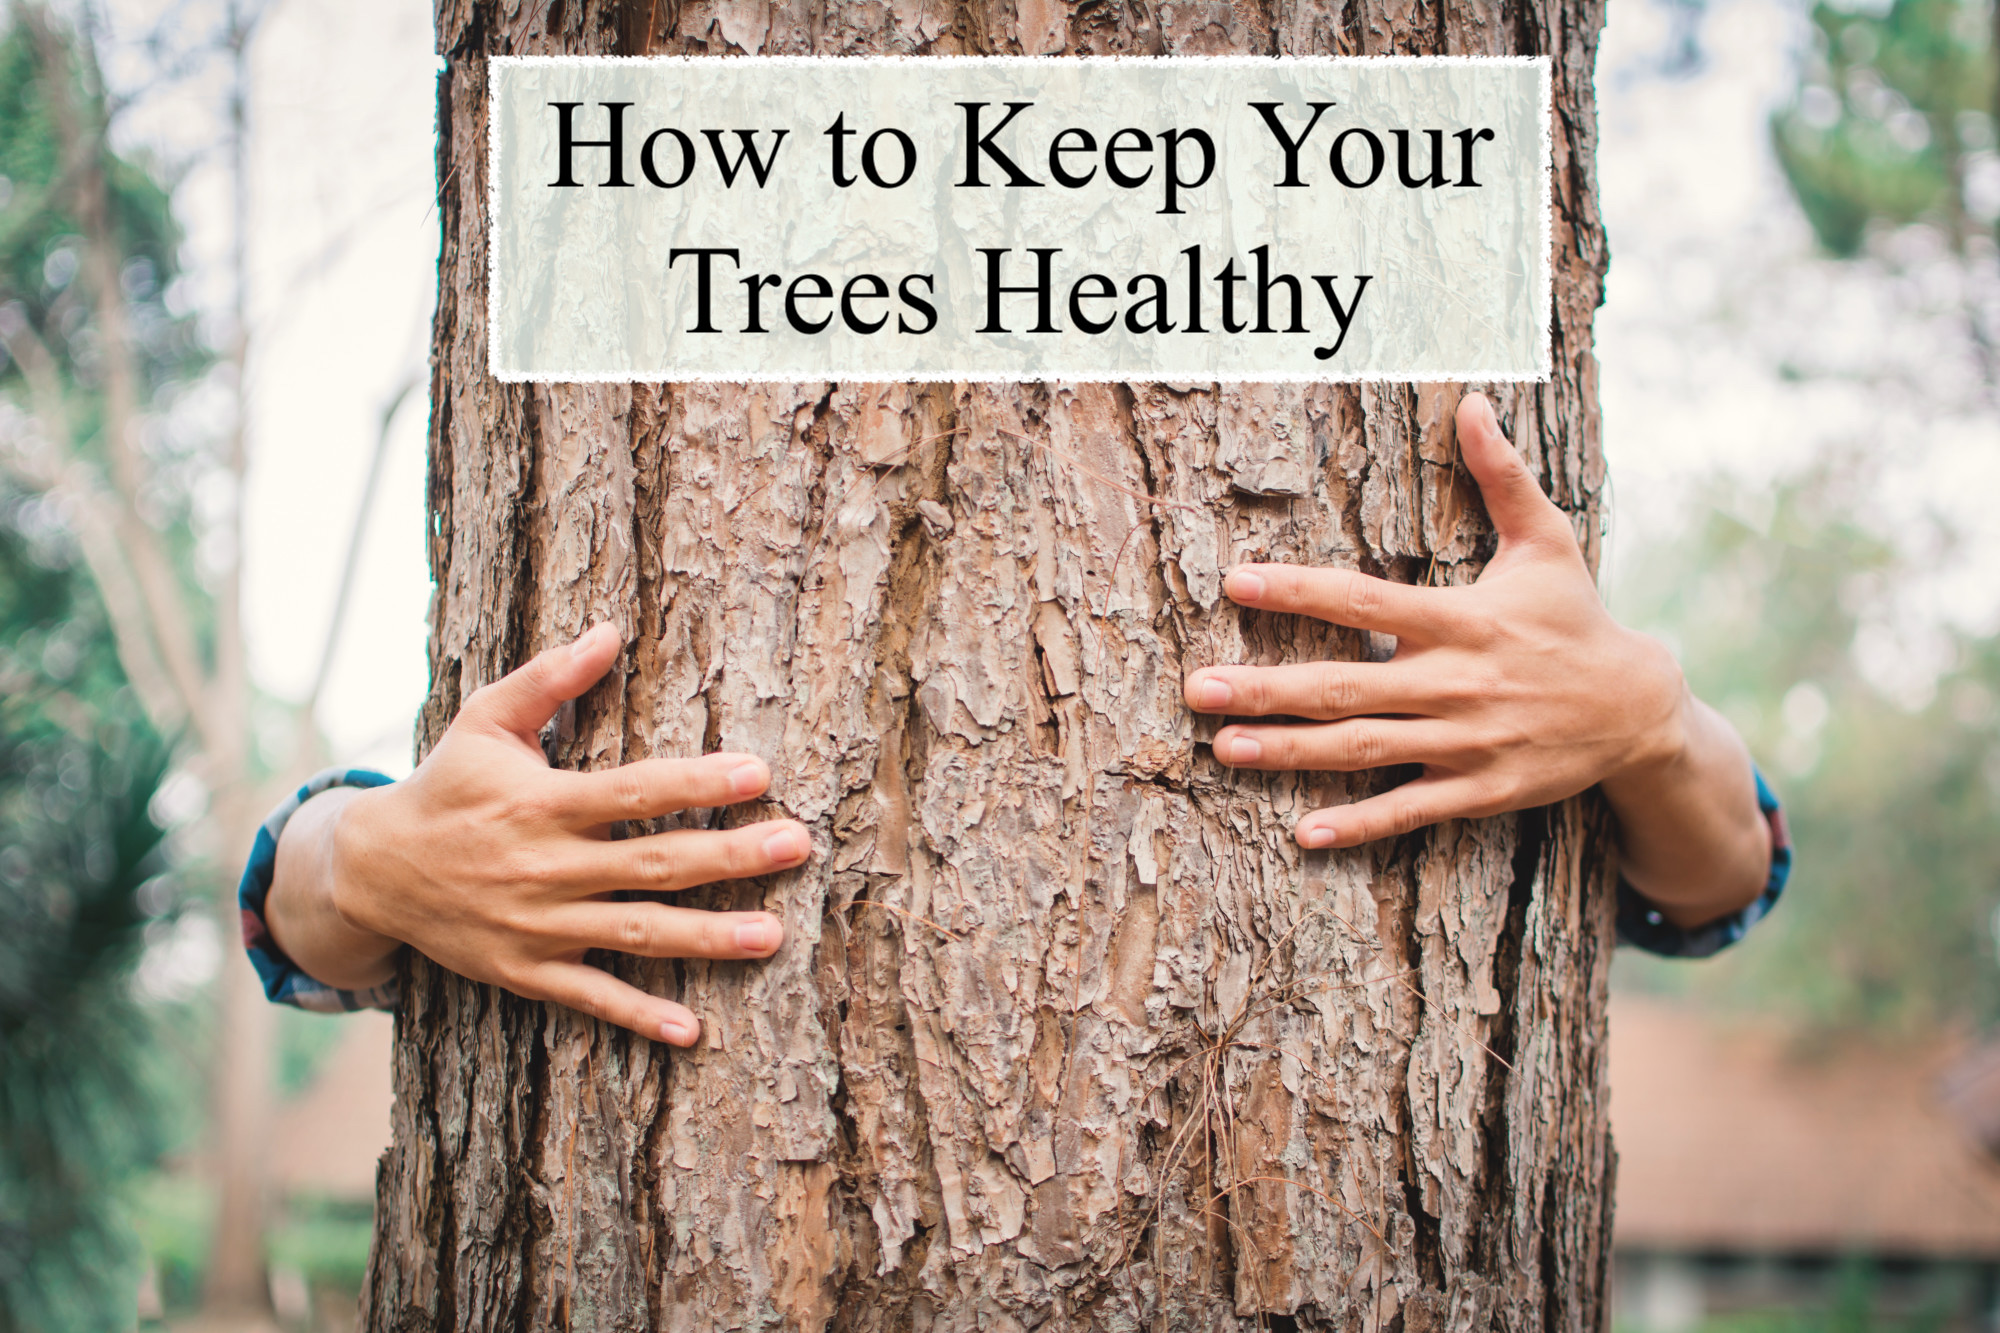 How to Keep Your Trees Healthy